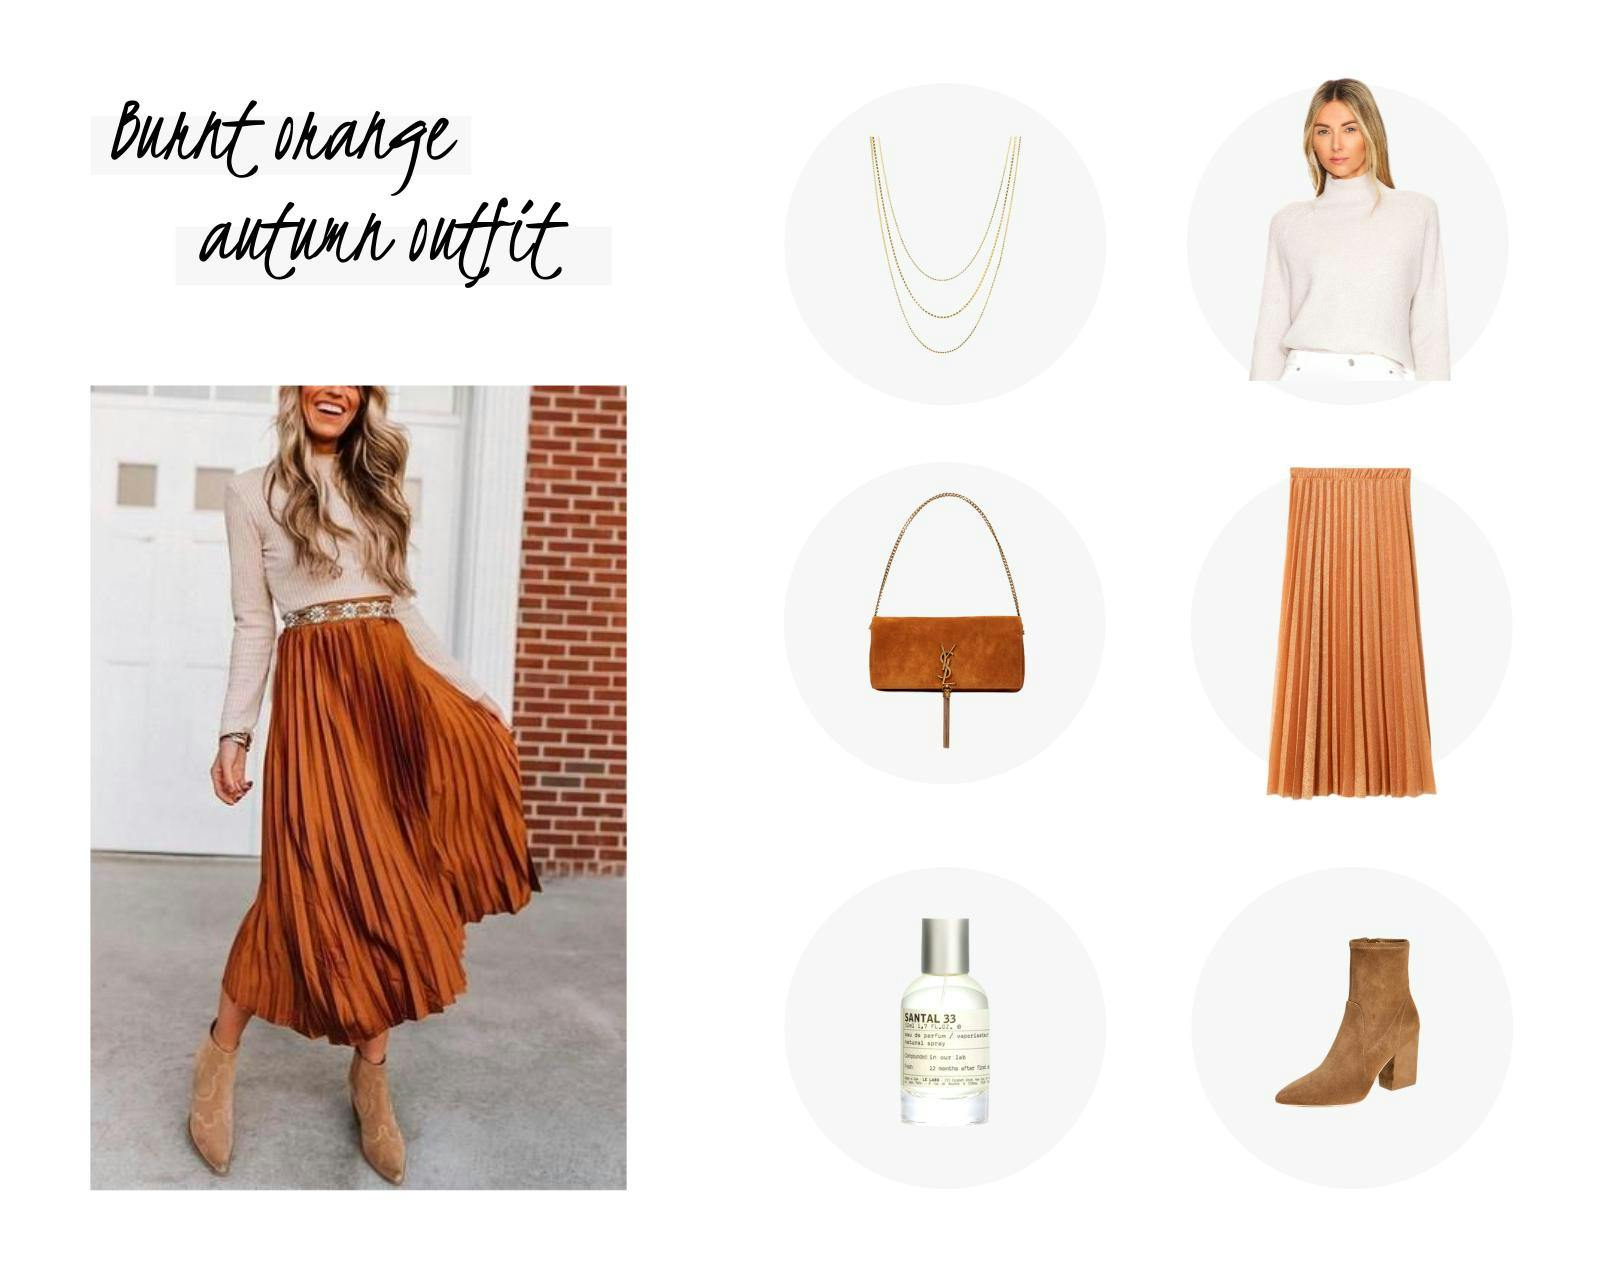 Chic autumn outfit with details in camel and orange